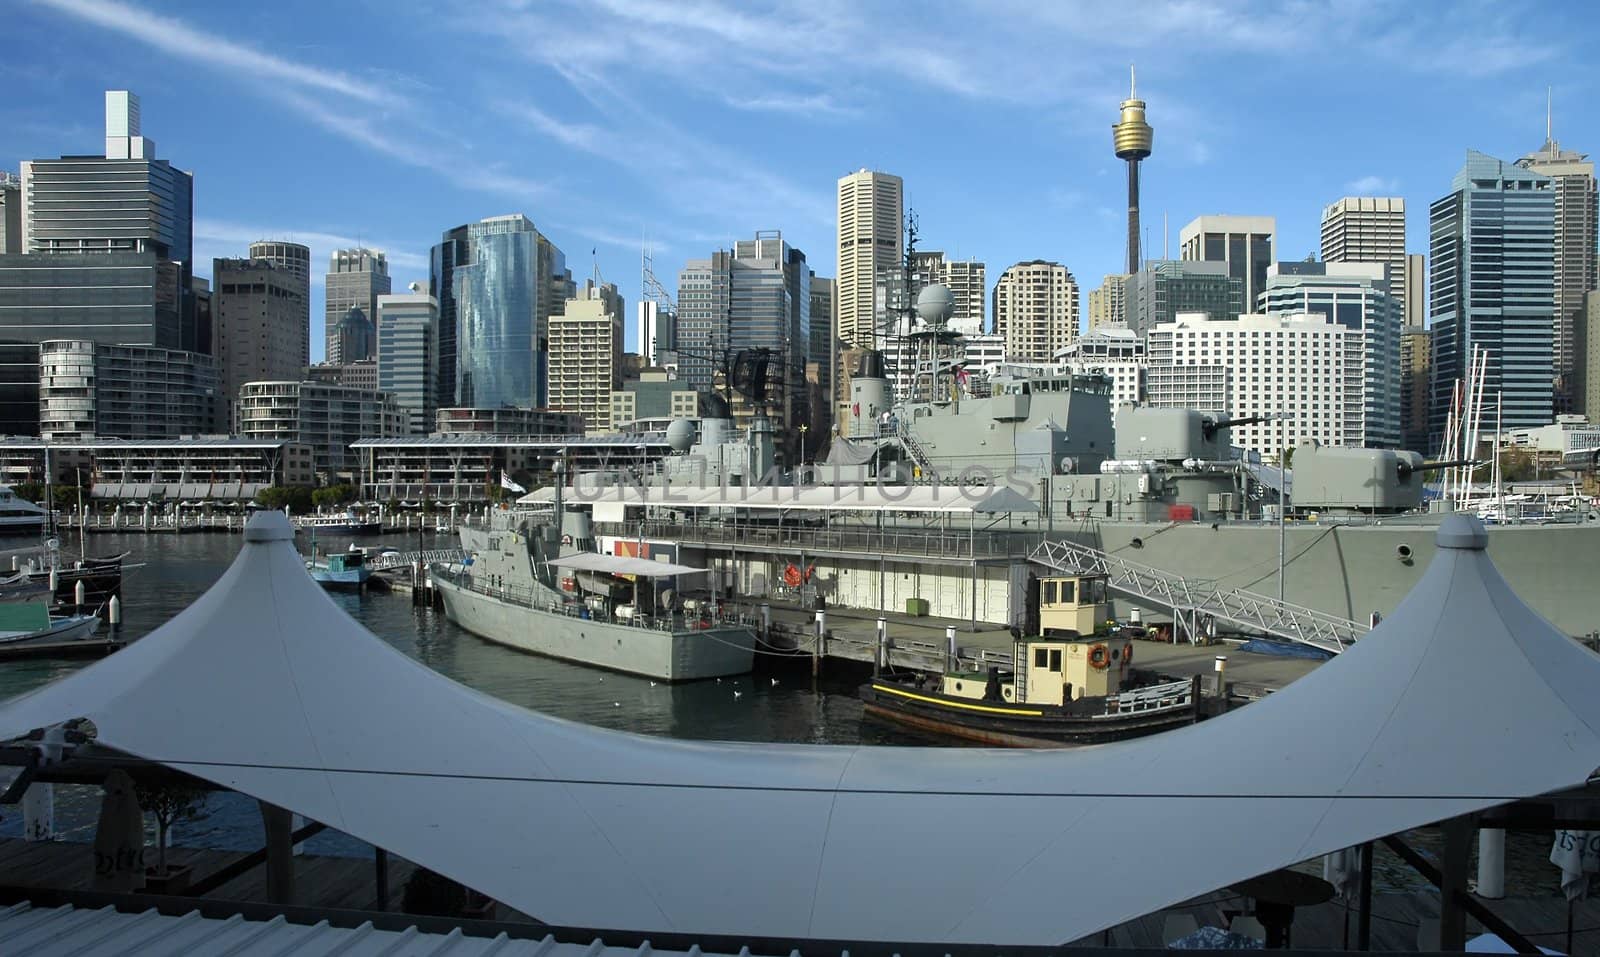 darling harbour, army battle ship attraction, sydney tower, cbd skyscrapers